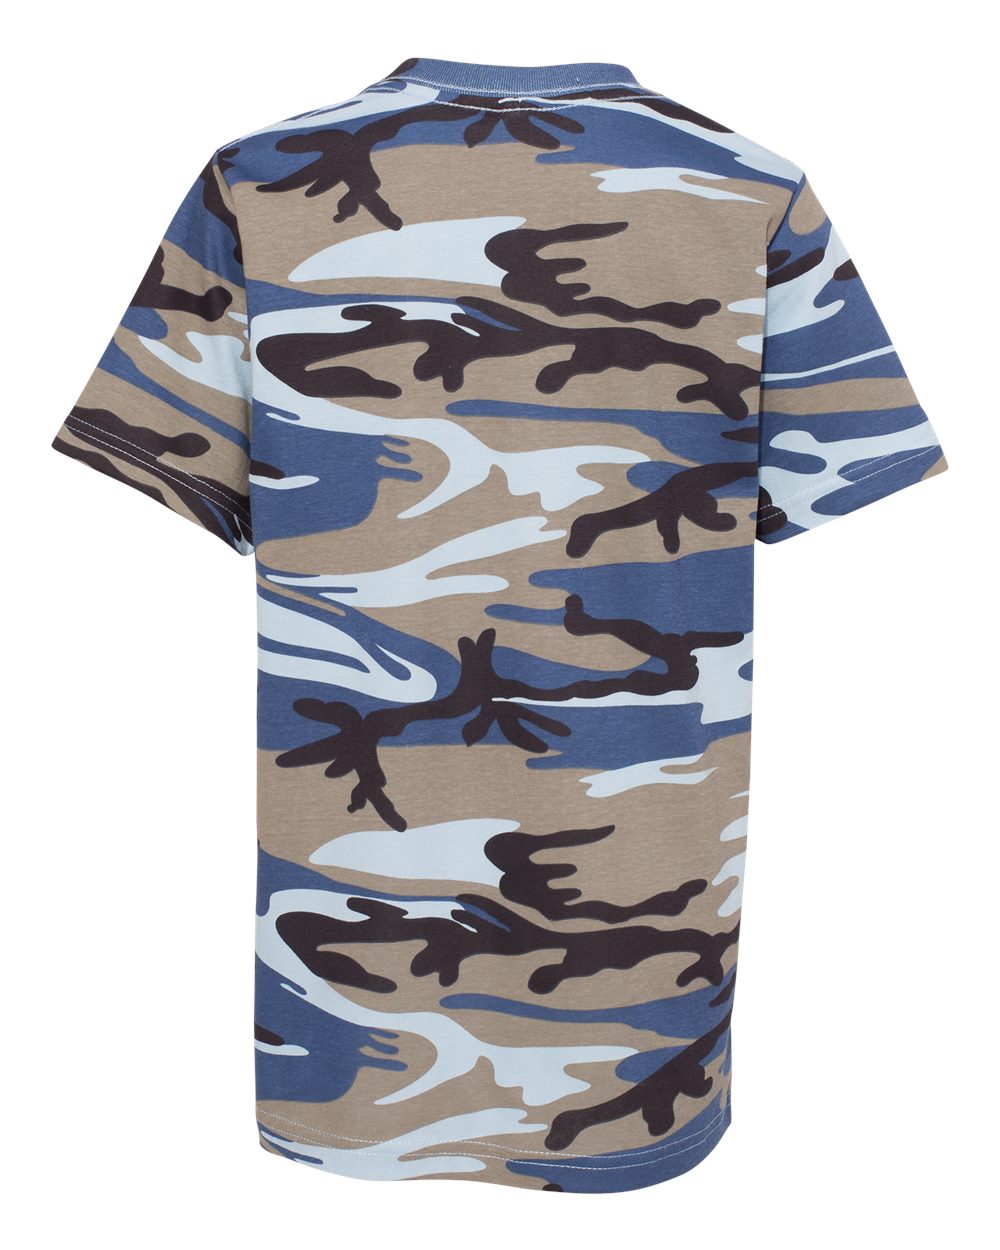 Youth Camouflage T-Shirt - 2207-